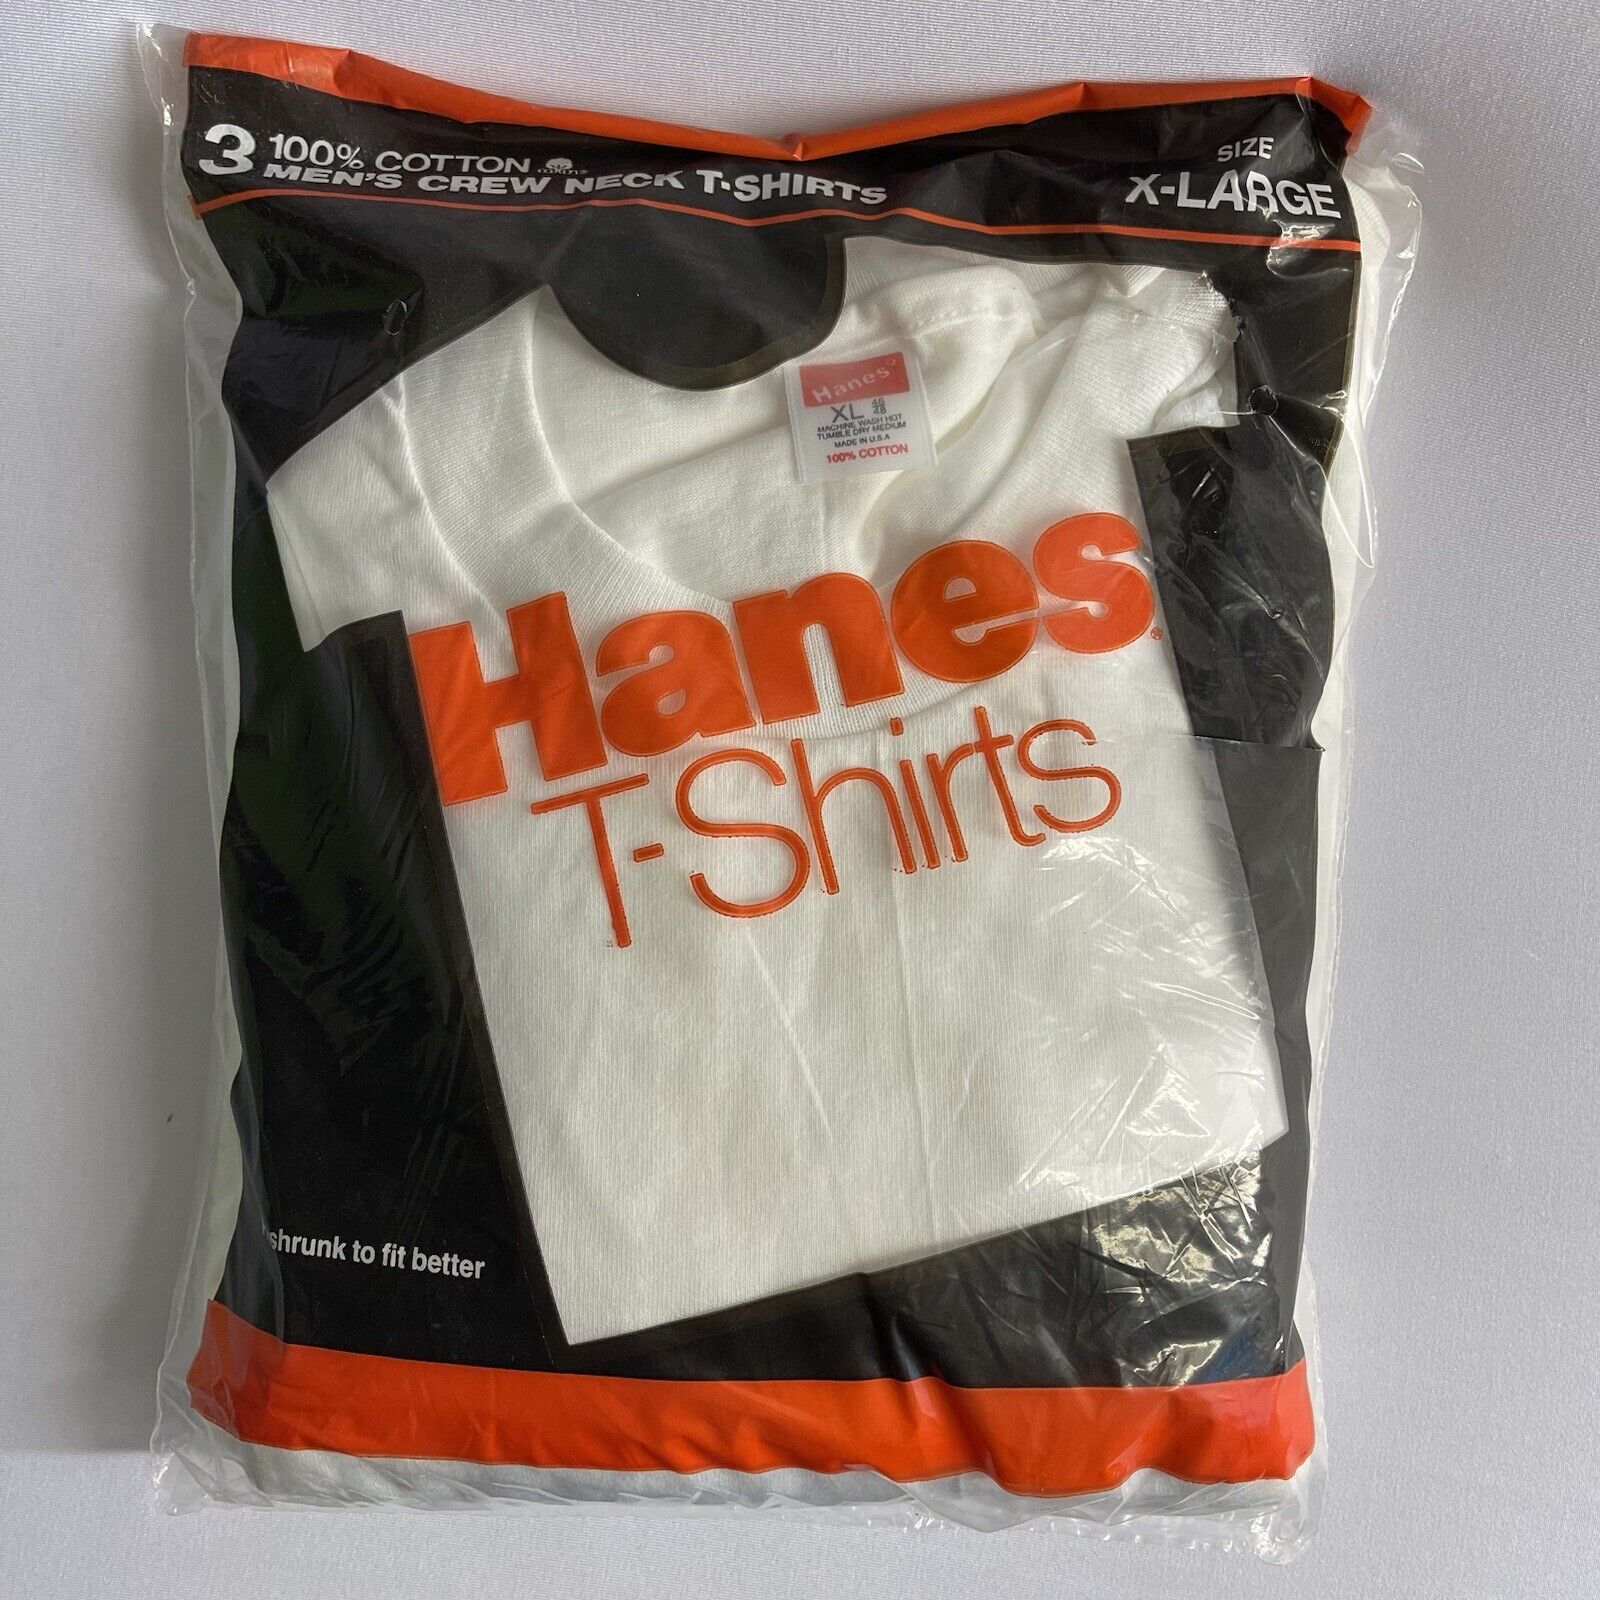 Vintage Hanes Crew Neck TShirts white 3 Pack (1989) EXTRA LARGE NEW unopened NOS